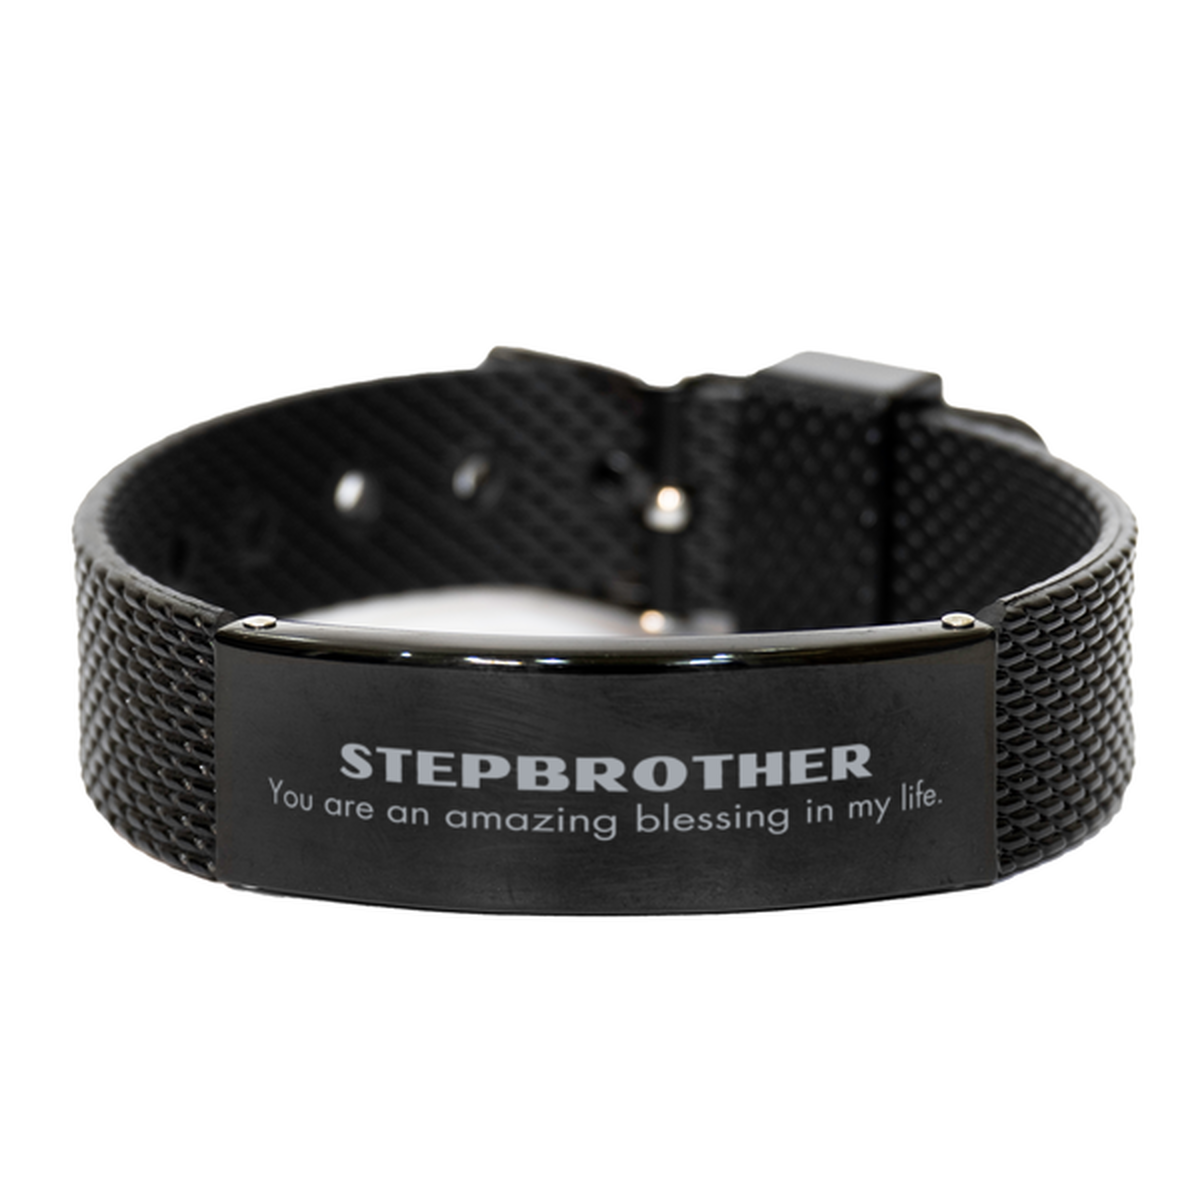 Stepbrother Black Shark Mesh Bracelet, You are an amazing blessing in my life, Thank You Gifts For Stepbrother, Inspirational Birthday Christmas Unique Gifts For Stepbrother